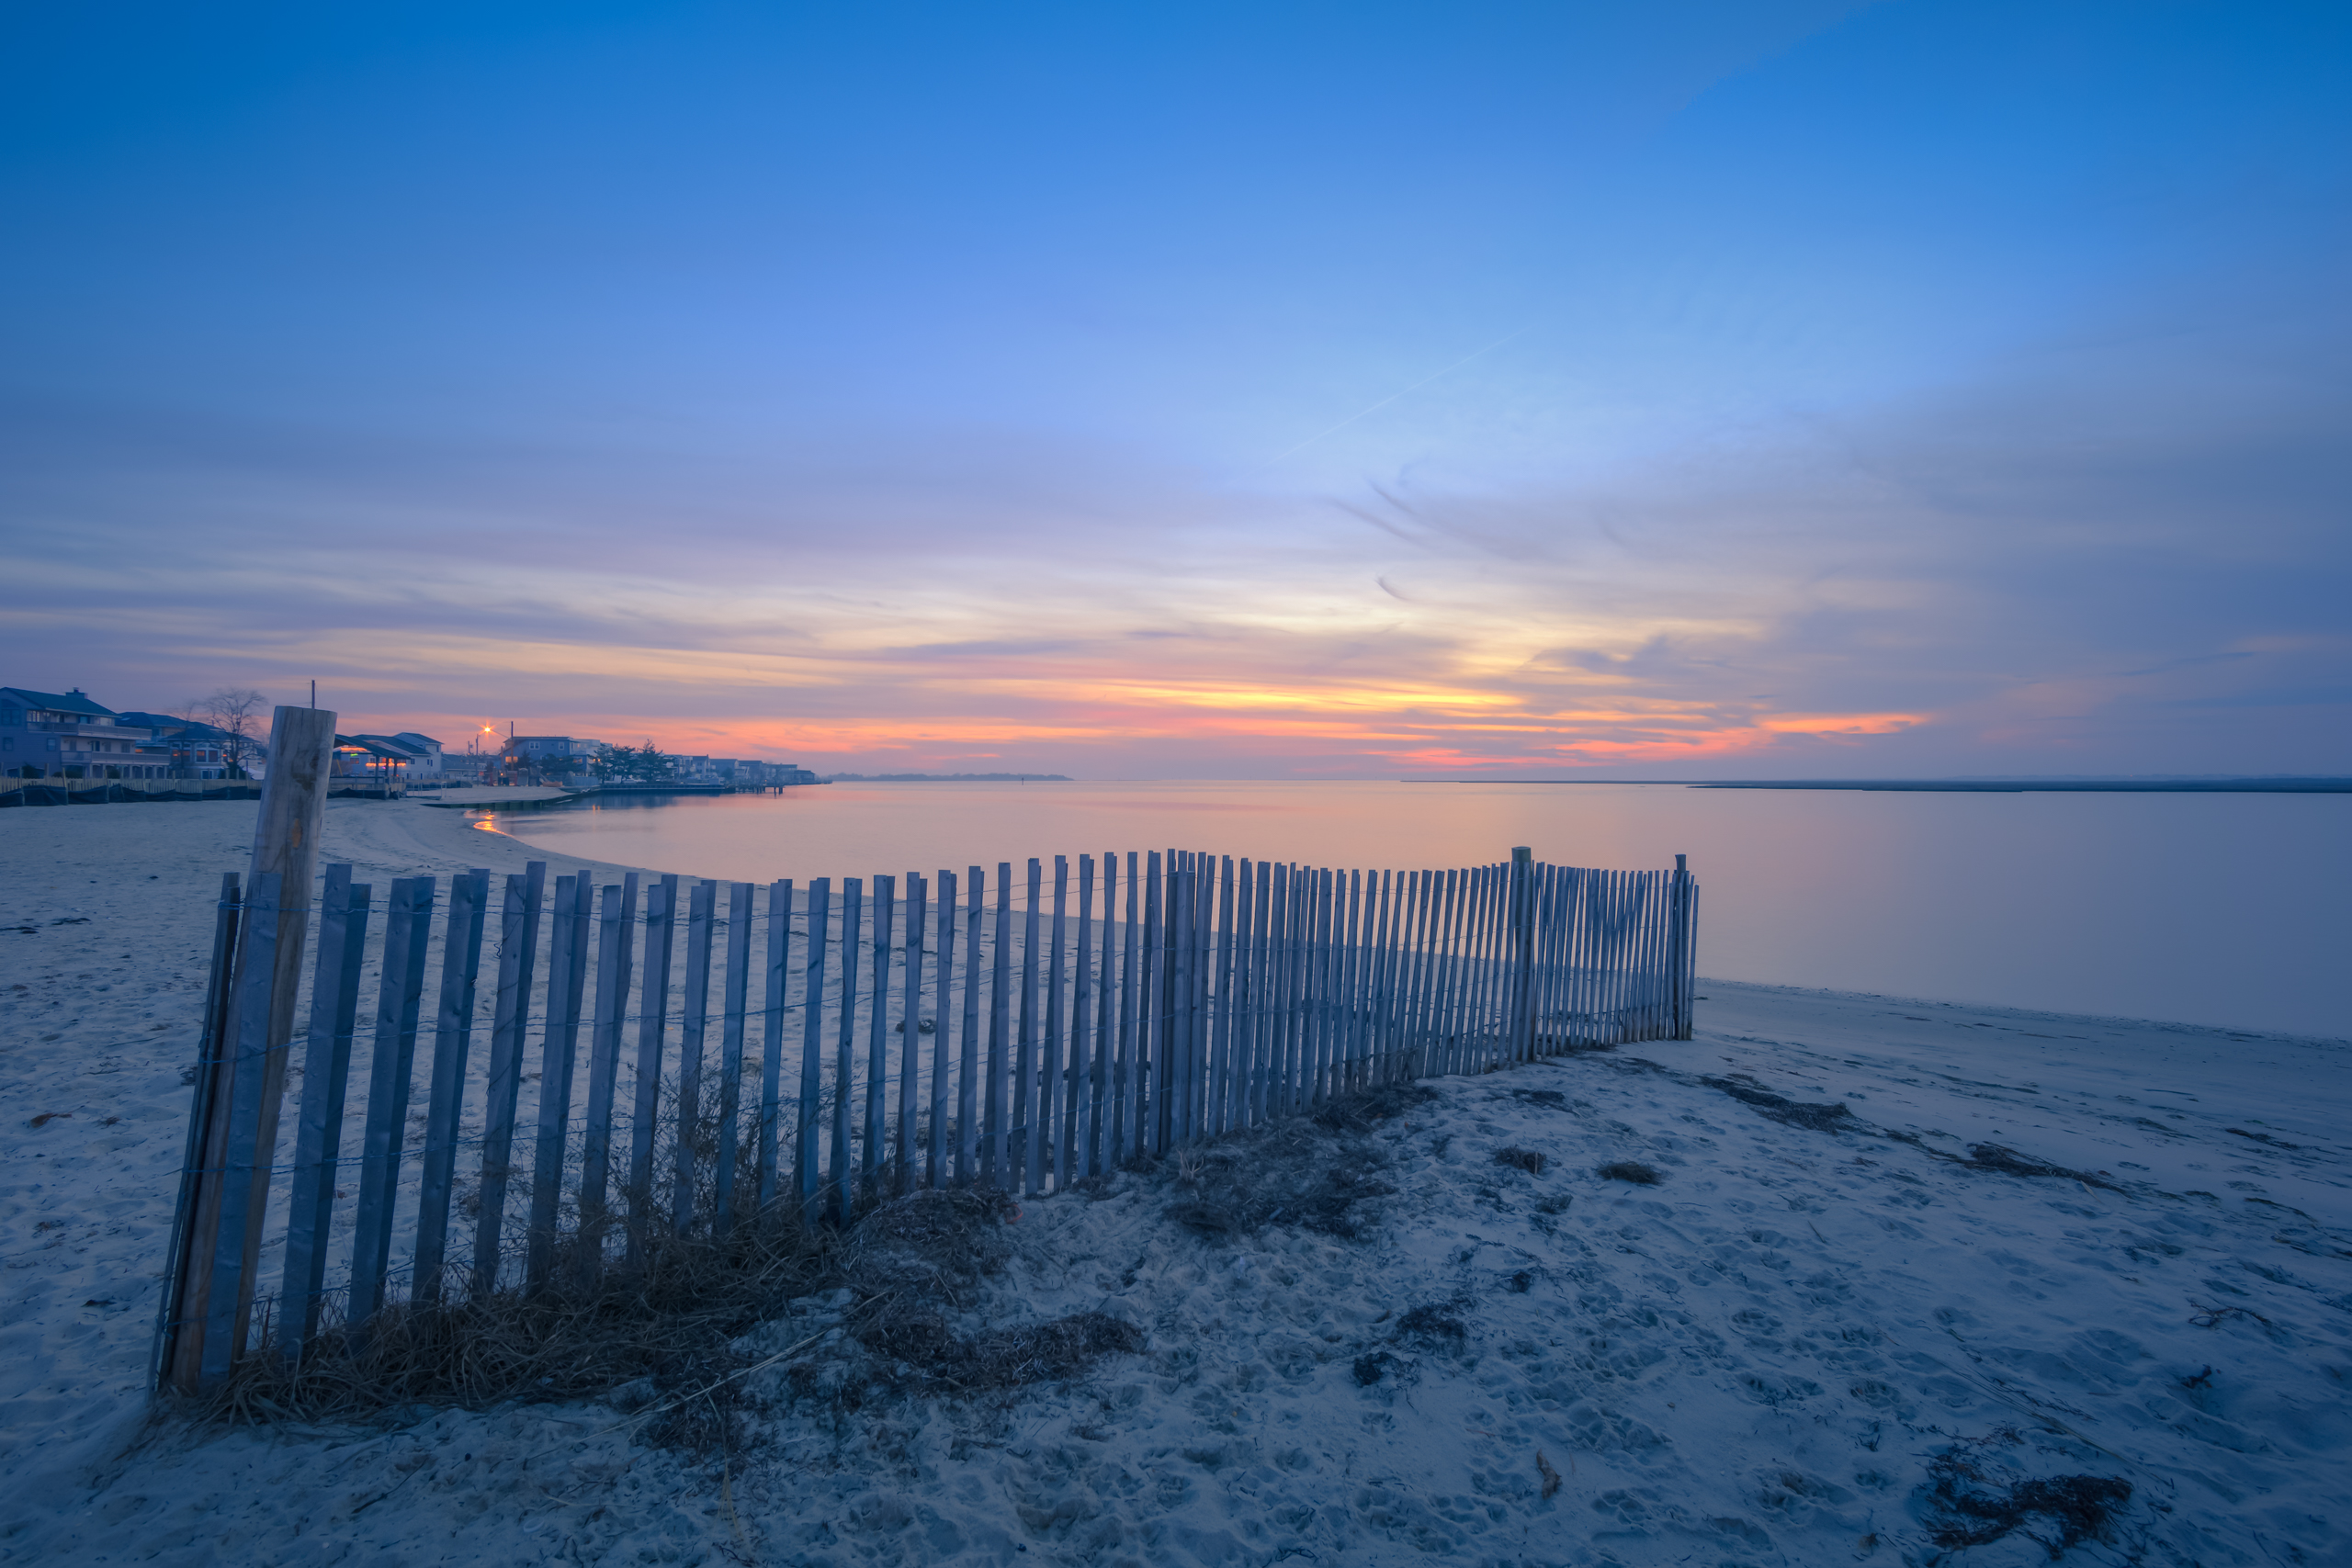 Blue hour HDR photograph overlooking dune fence and calm baywater